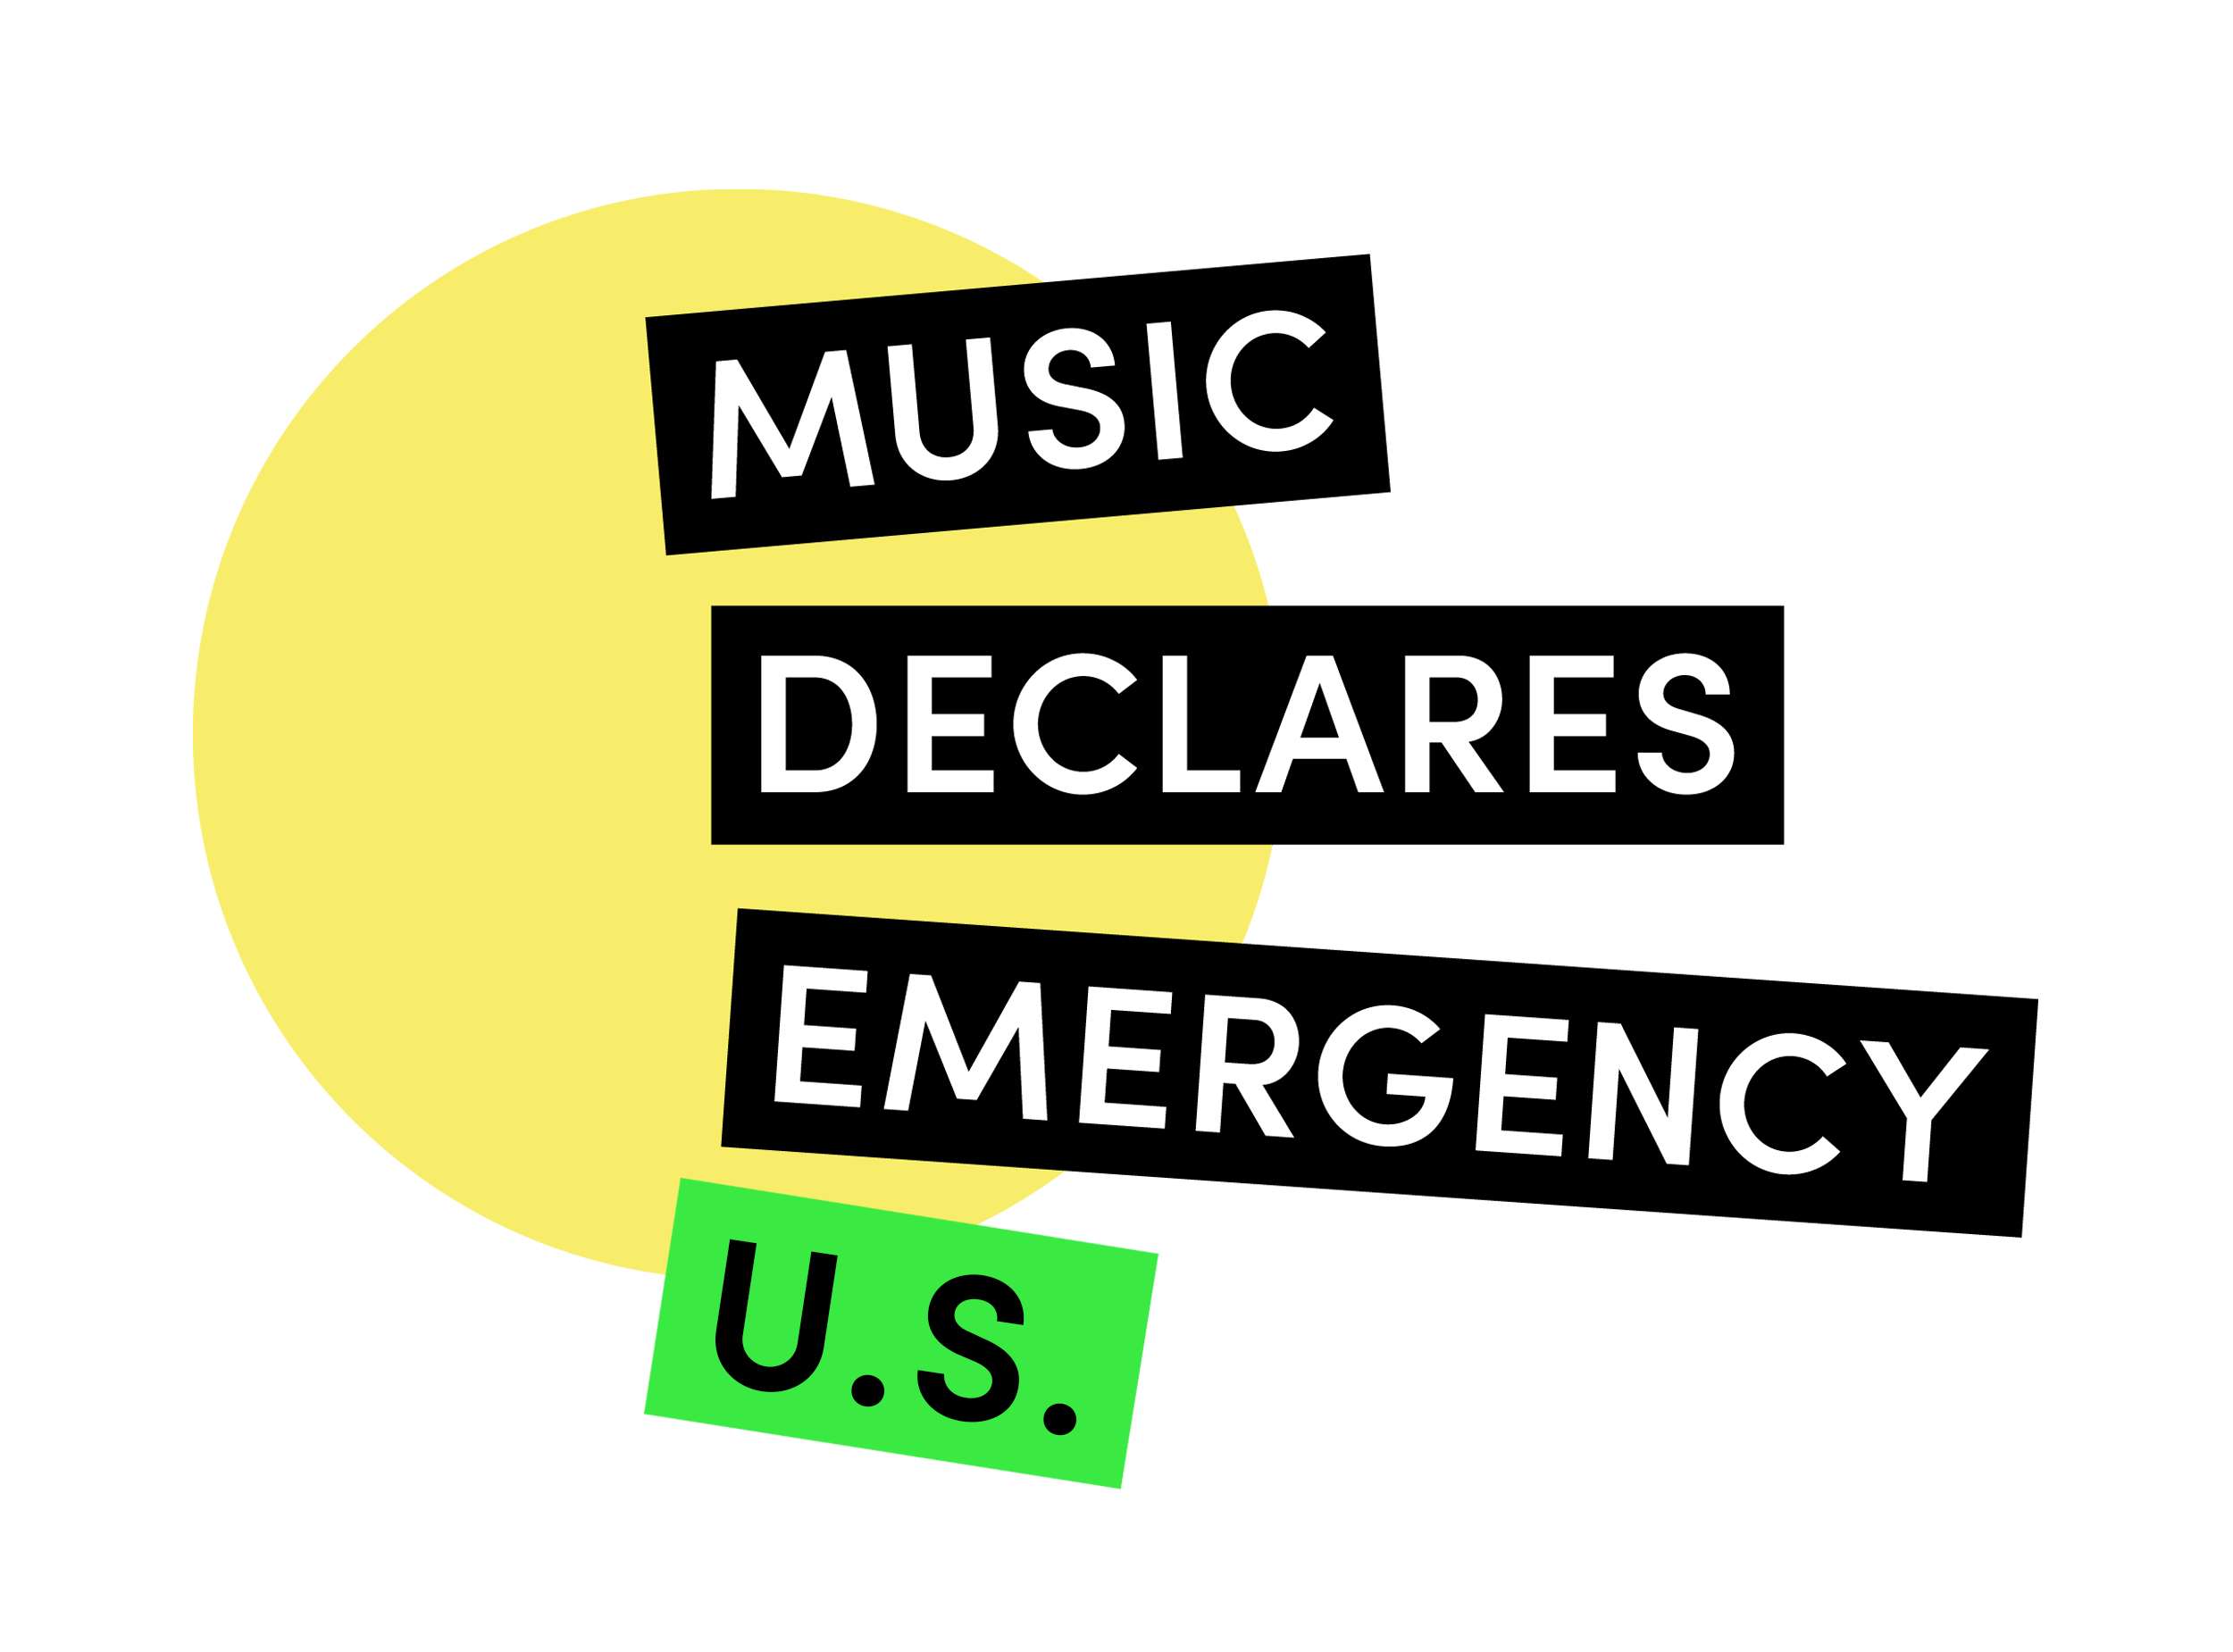 Fan Club for Climate  Music Declares Emergency